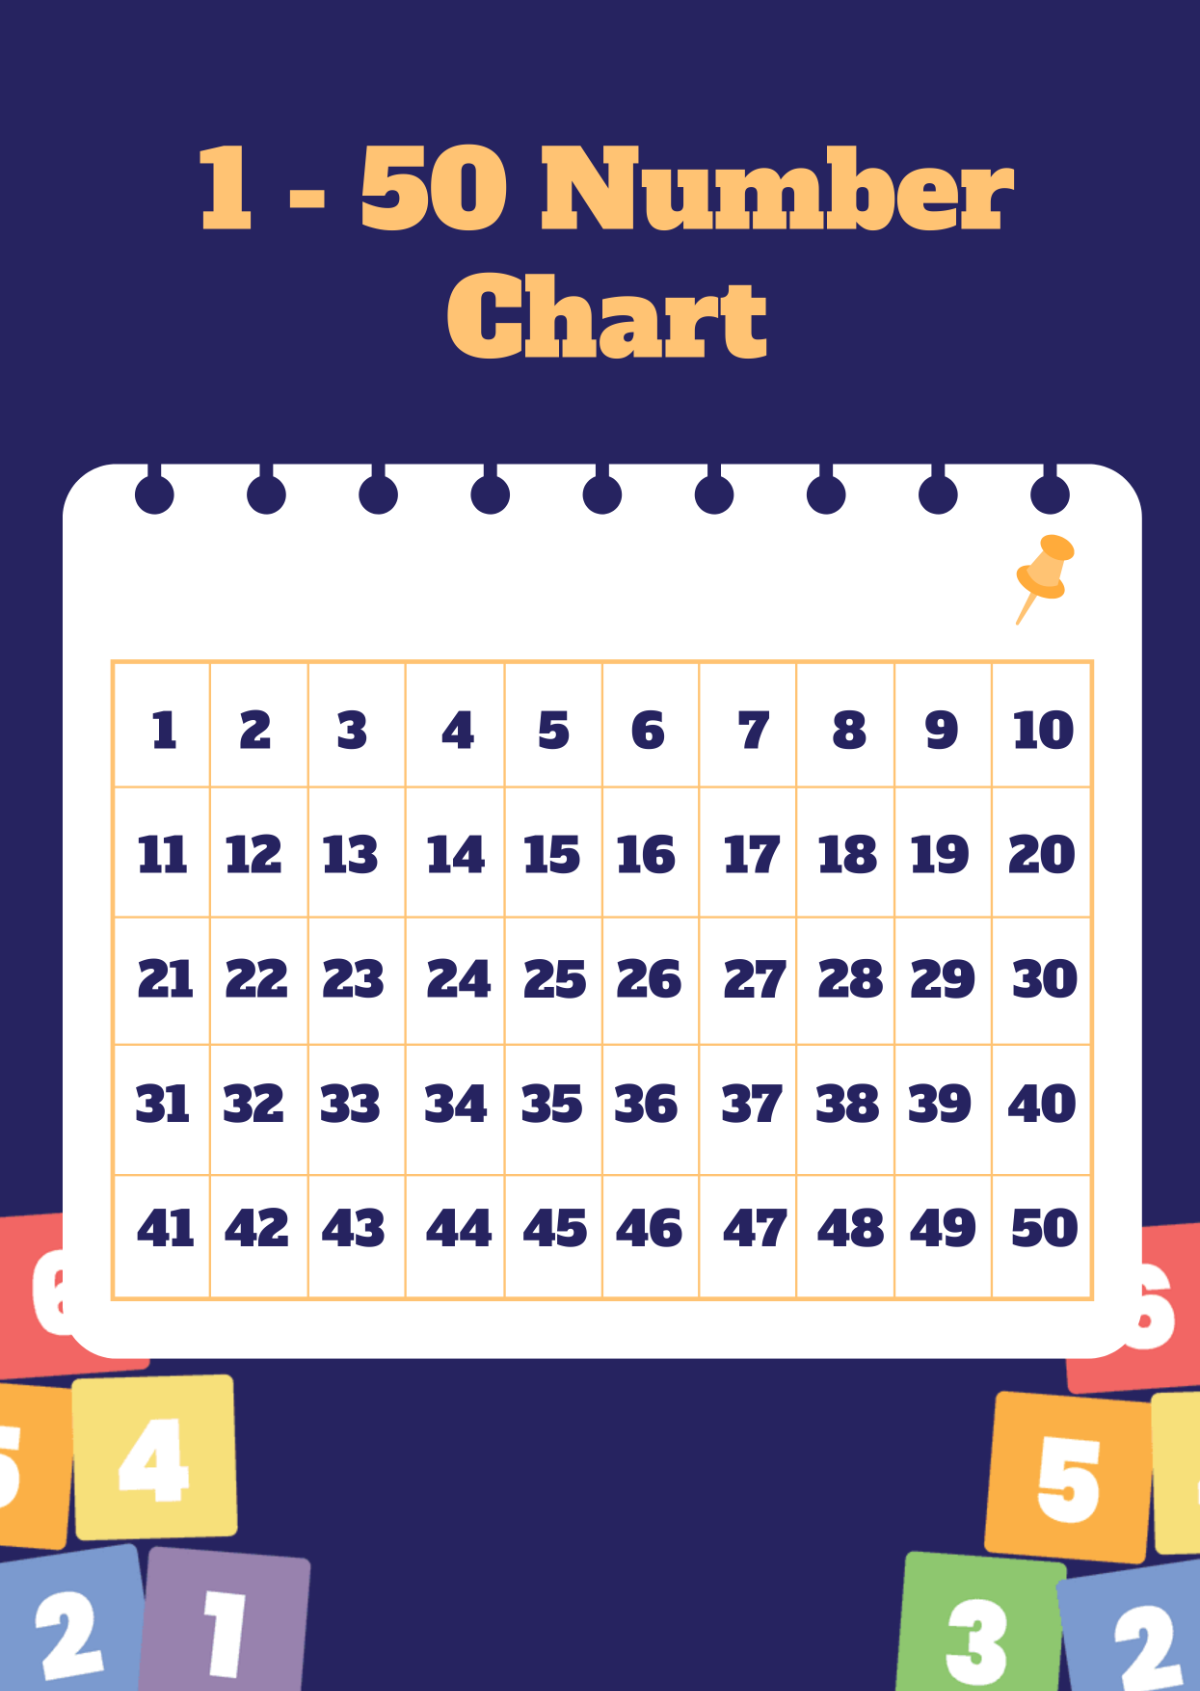 1 - 50 Number Chart